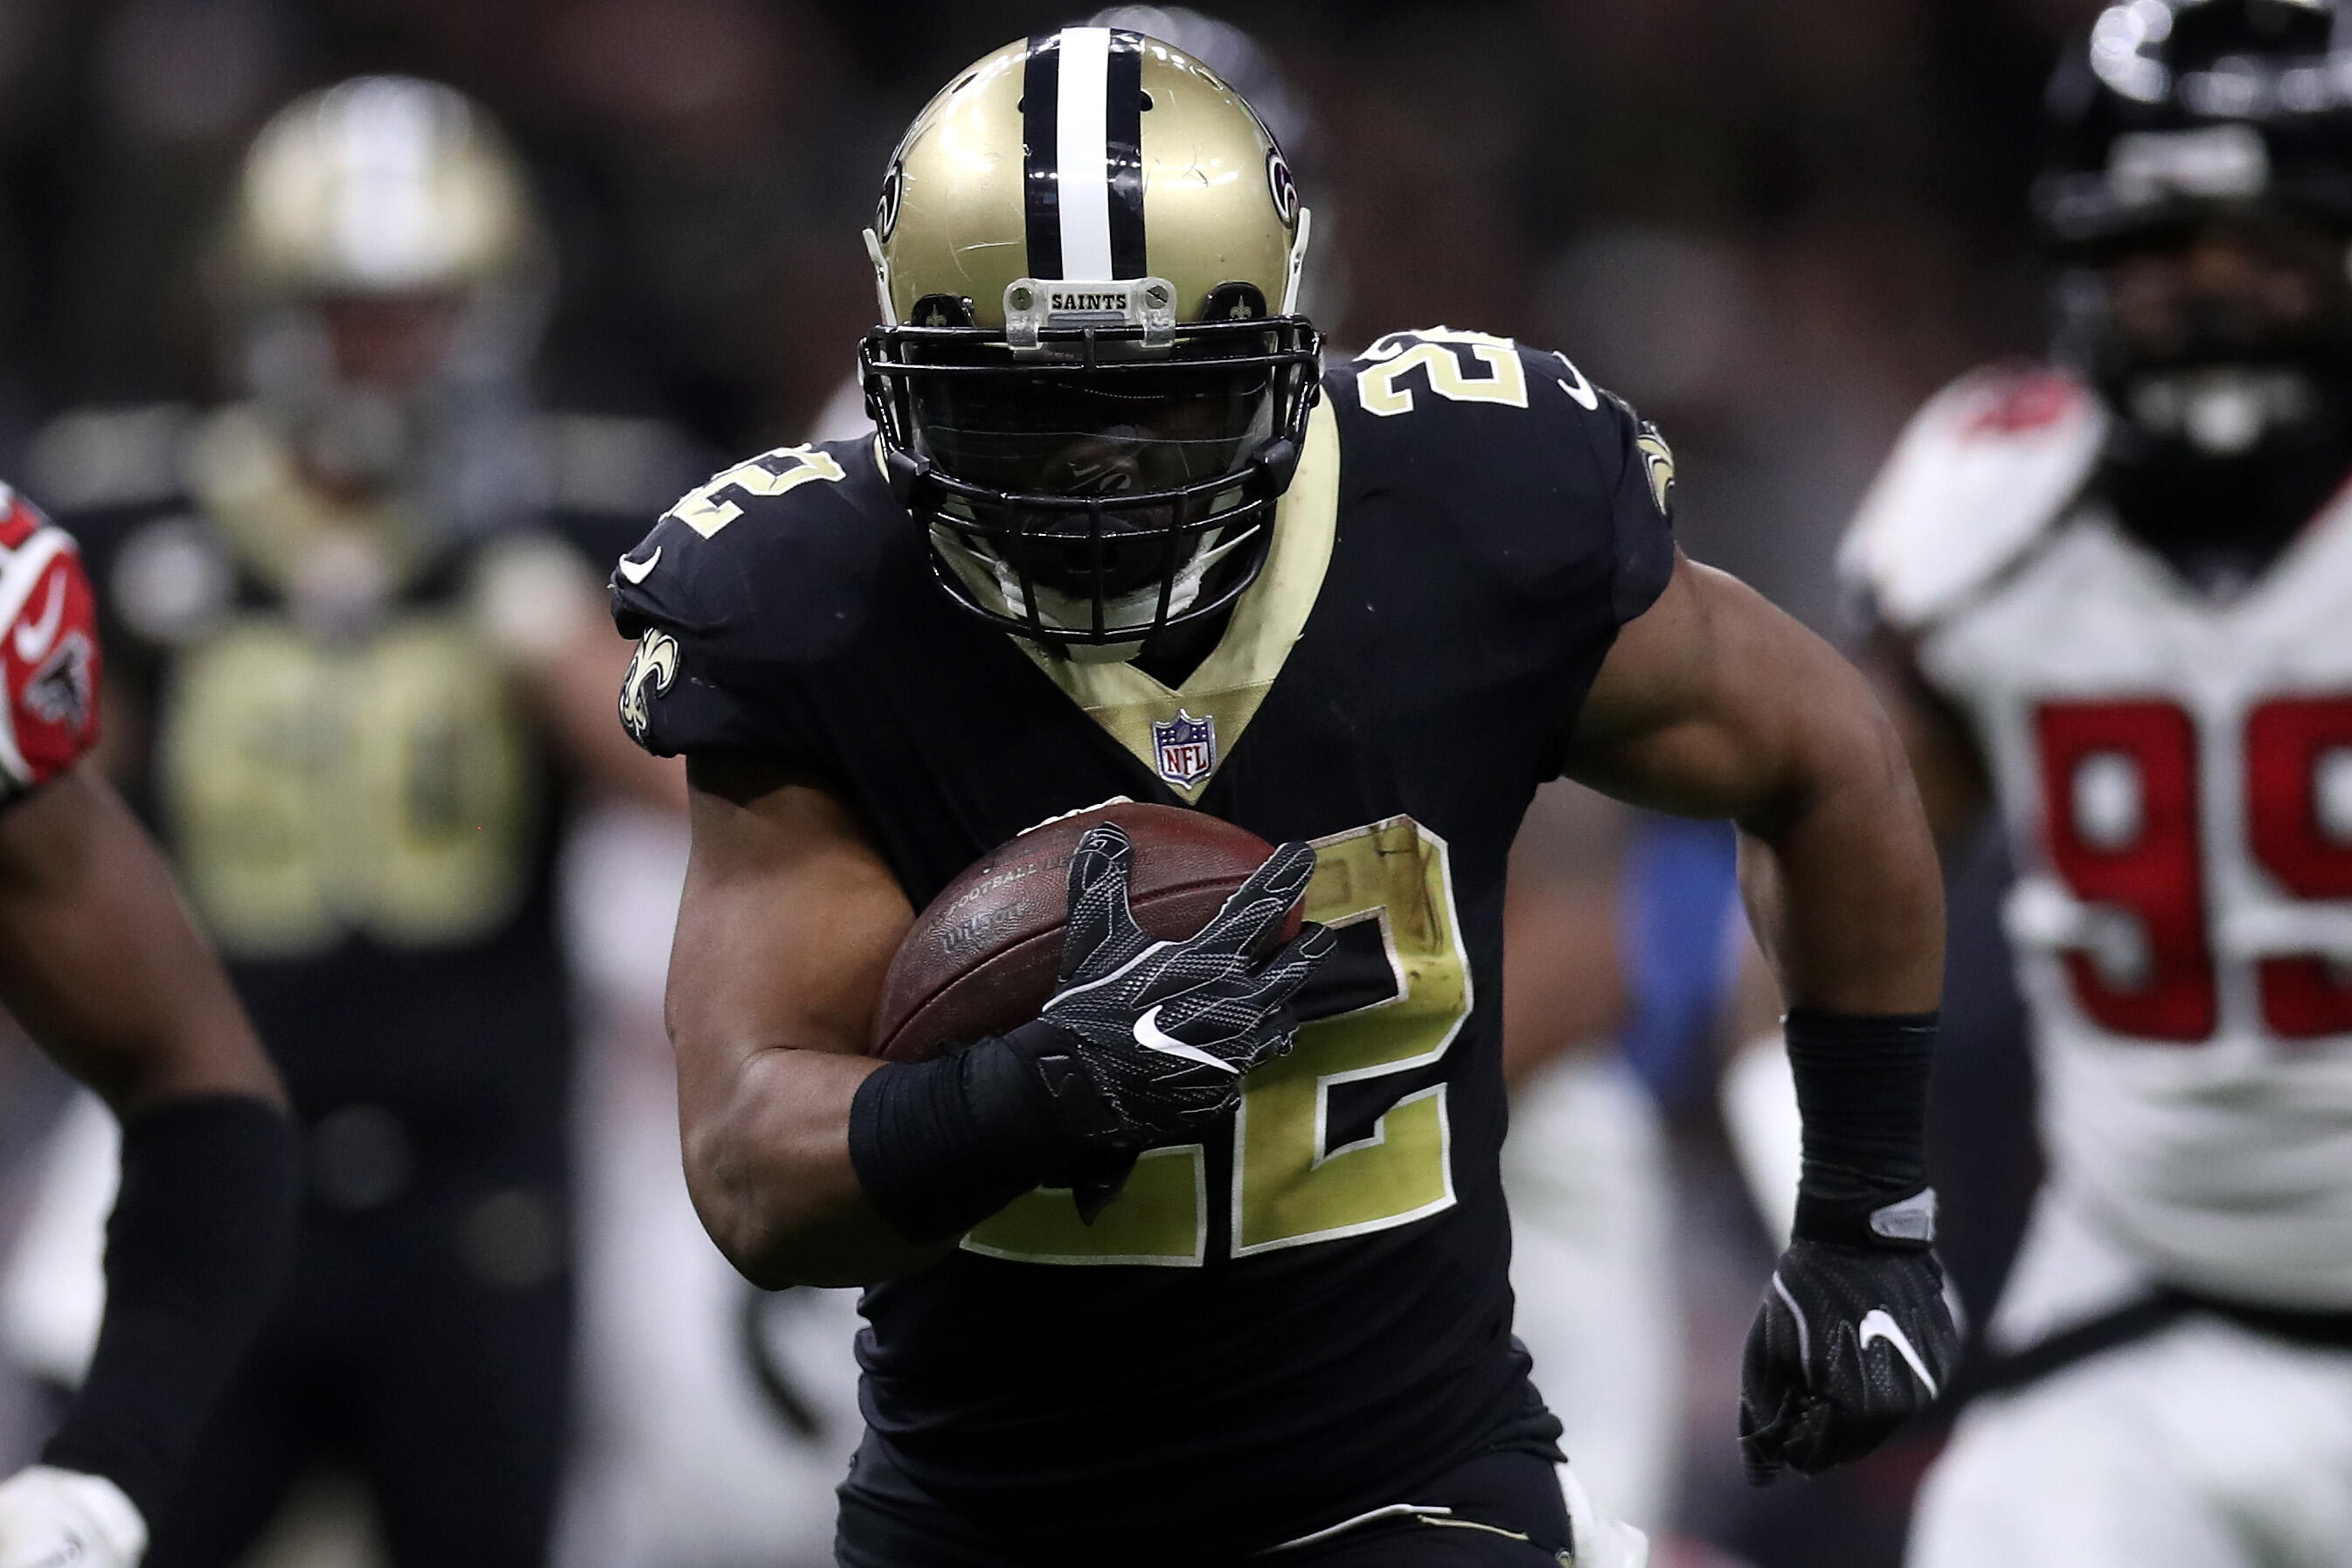 Ingram Returns To Saints With 'A Lot Of Stuff Pent Up' - Thumbnail Image